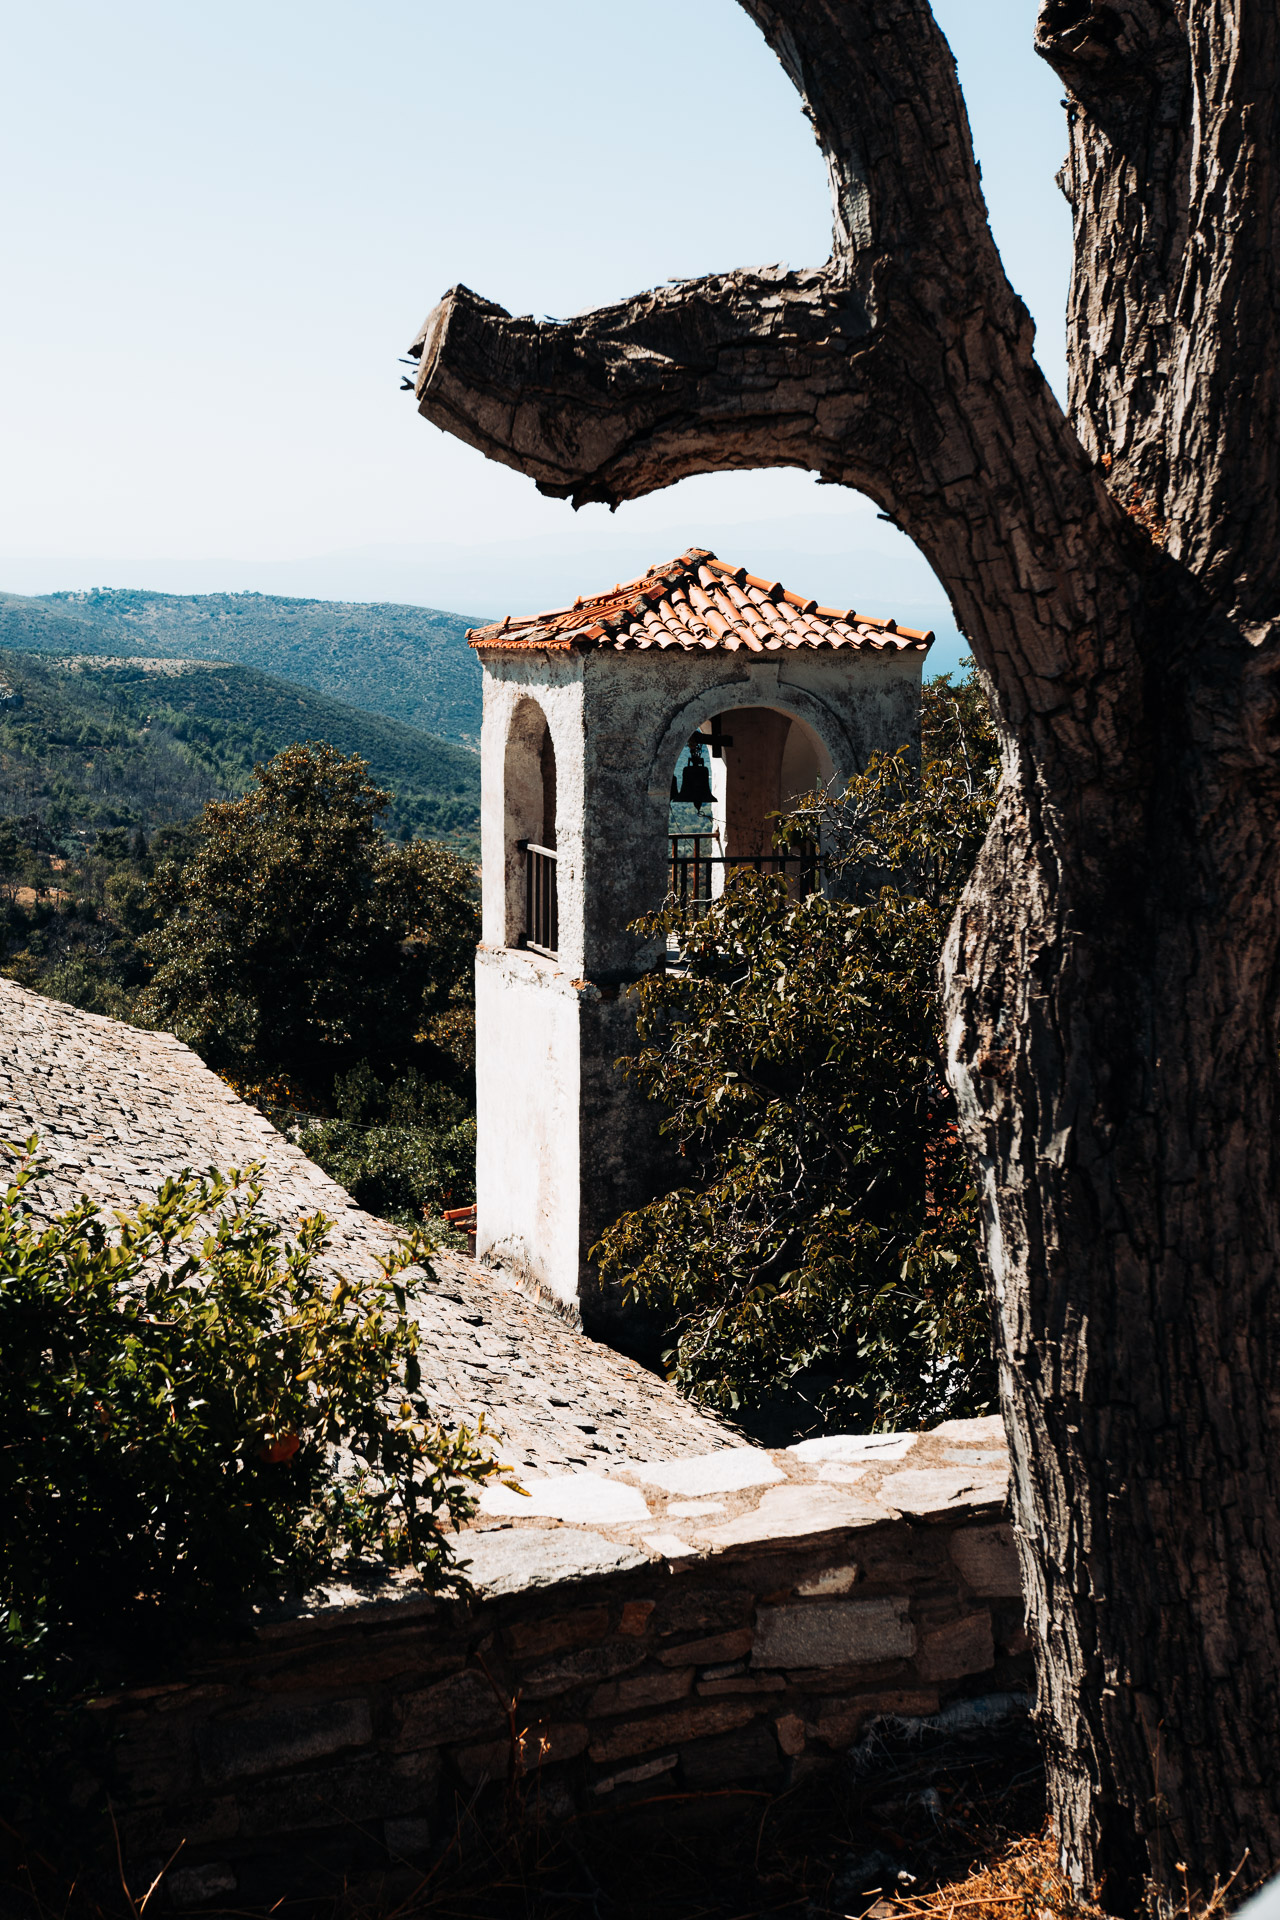 Photo of a church tower with a bell above an olive valley in Greece.